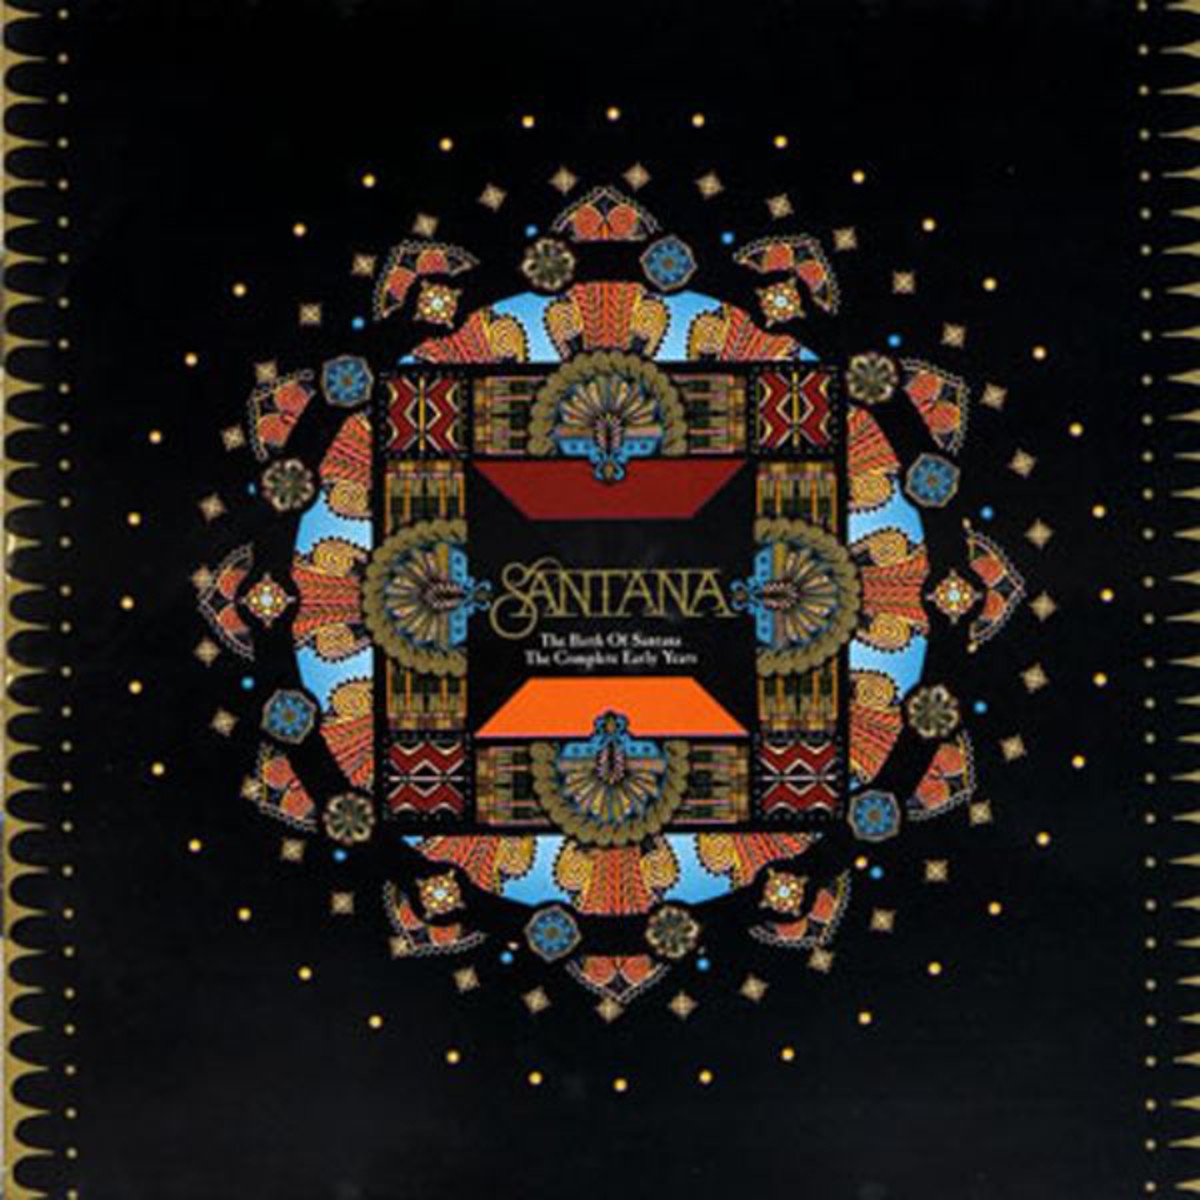 The Birth Of Santana - The Complete Early Years